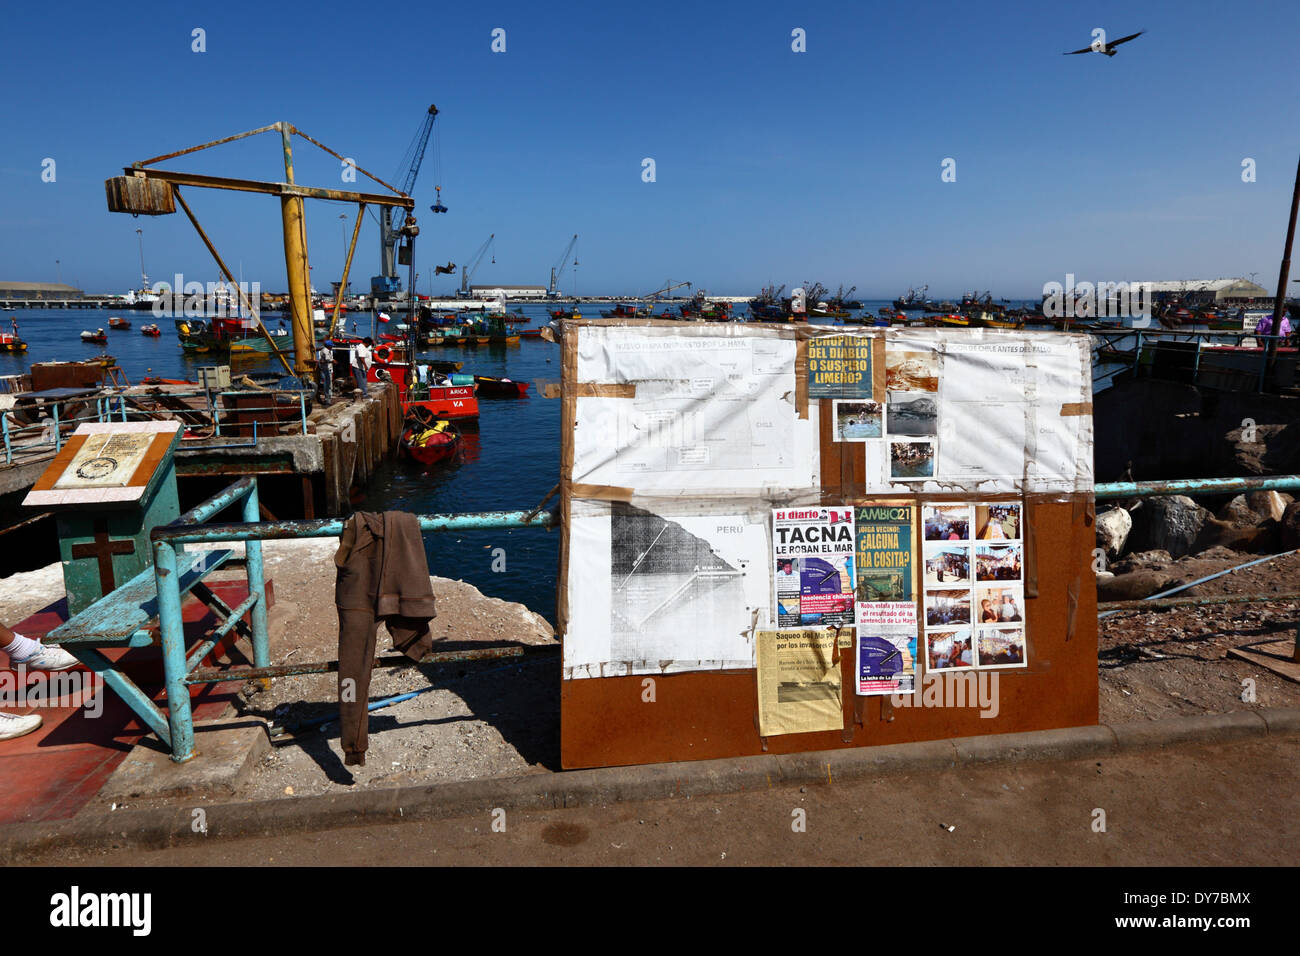 Notice board in fishing docks with information about The Hague ruling on Chile -Peru maritime border dispute, Arica, Chile Stock Photo